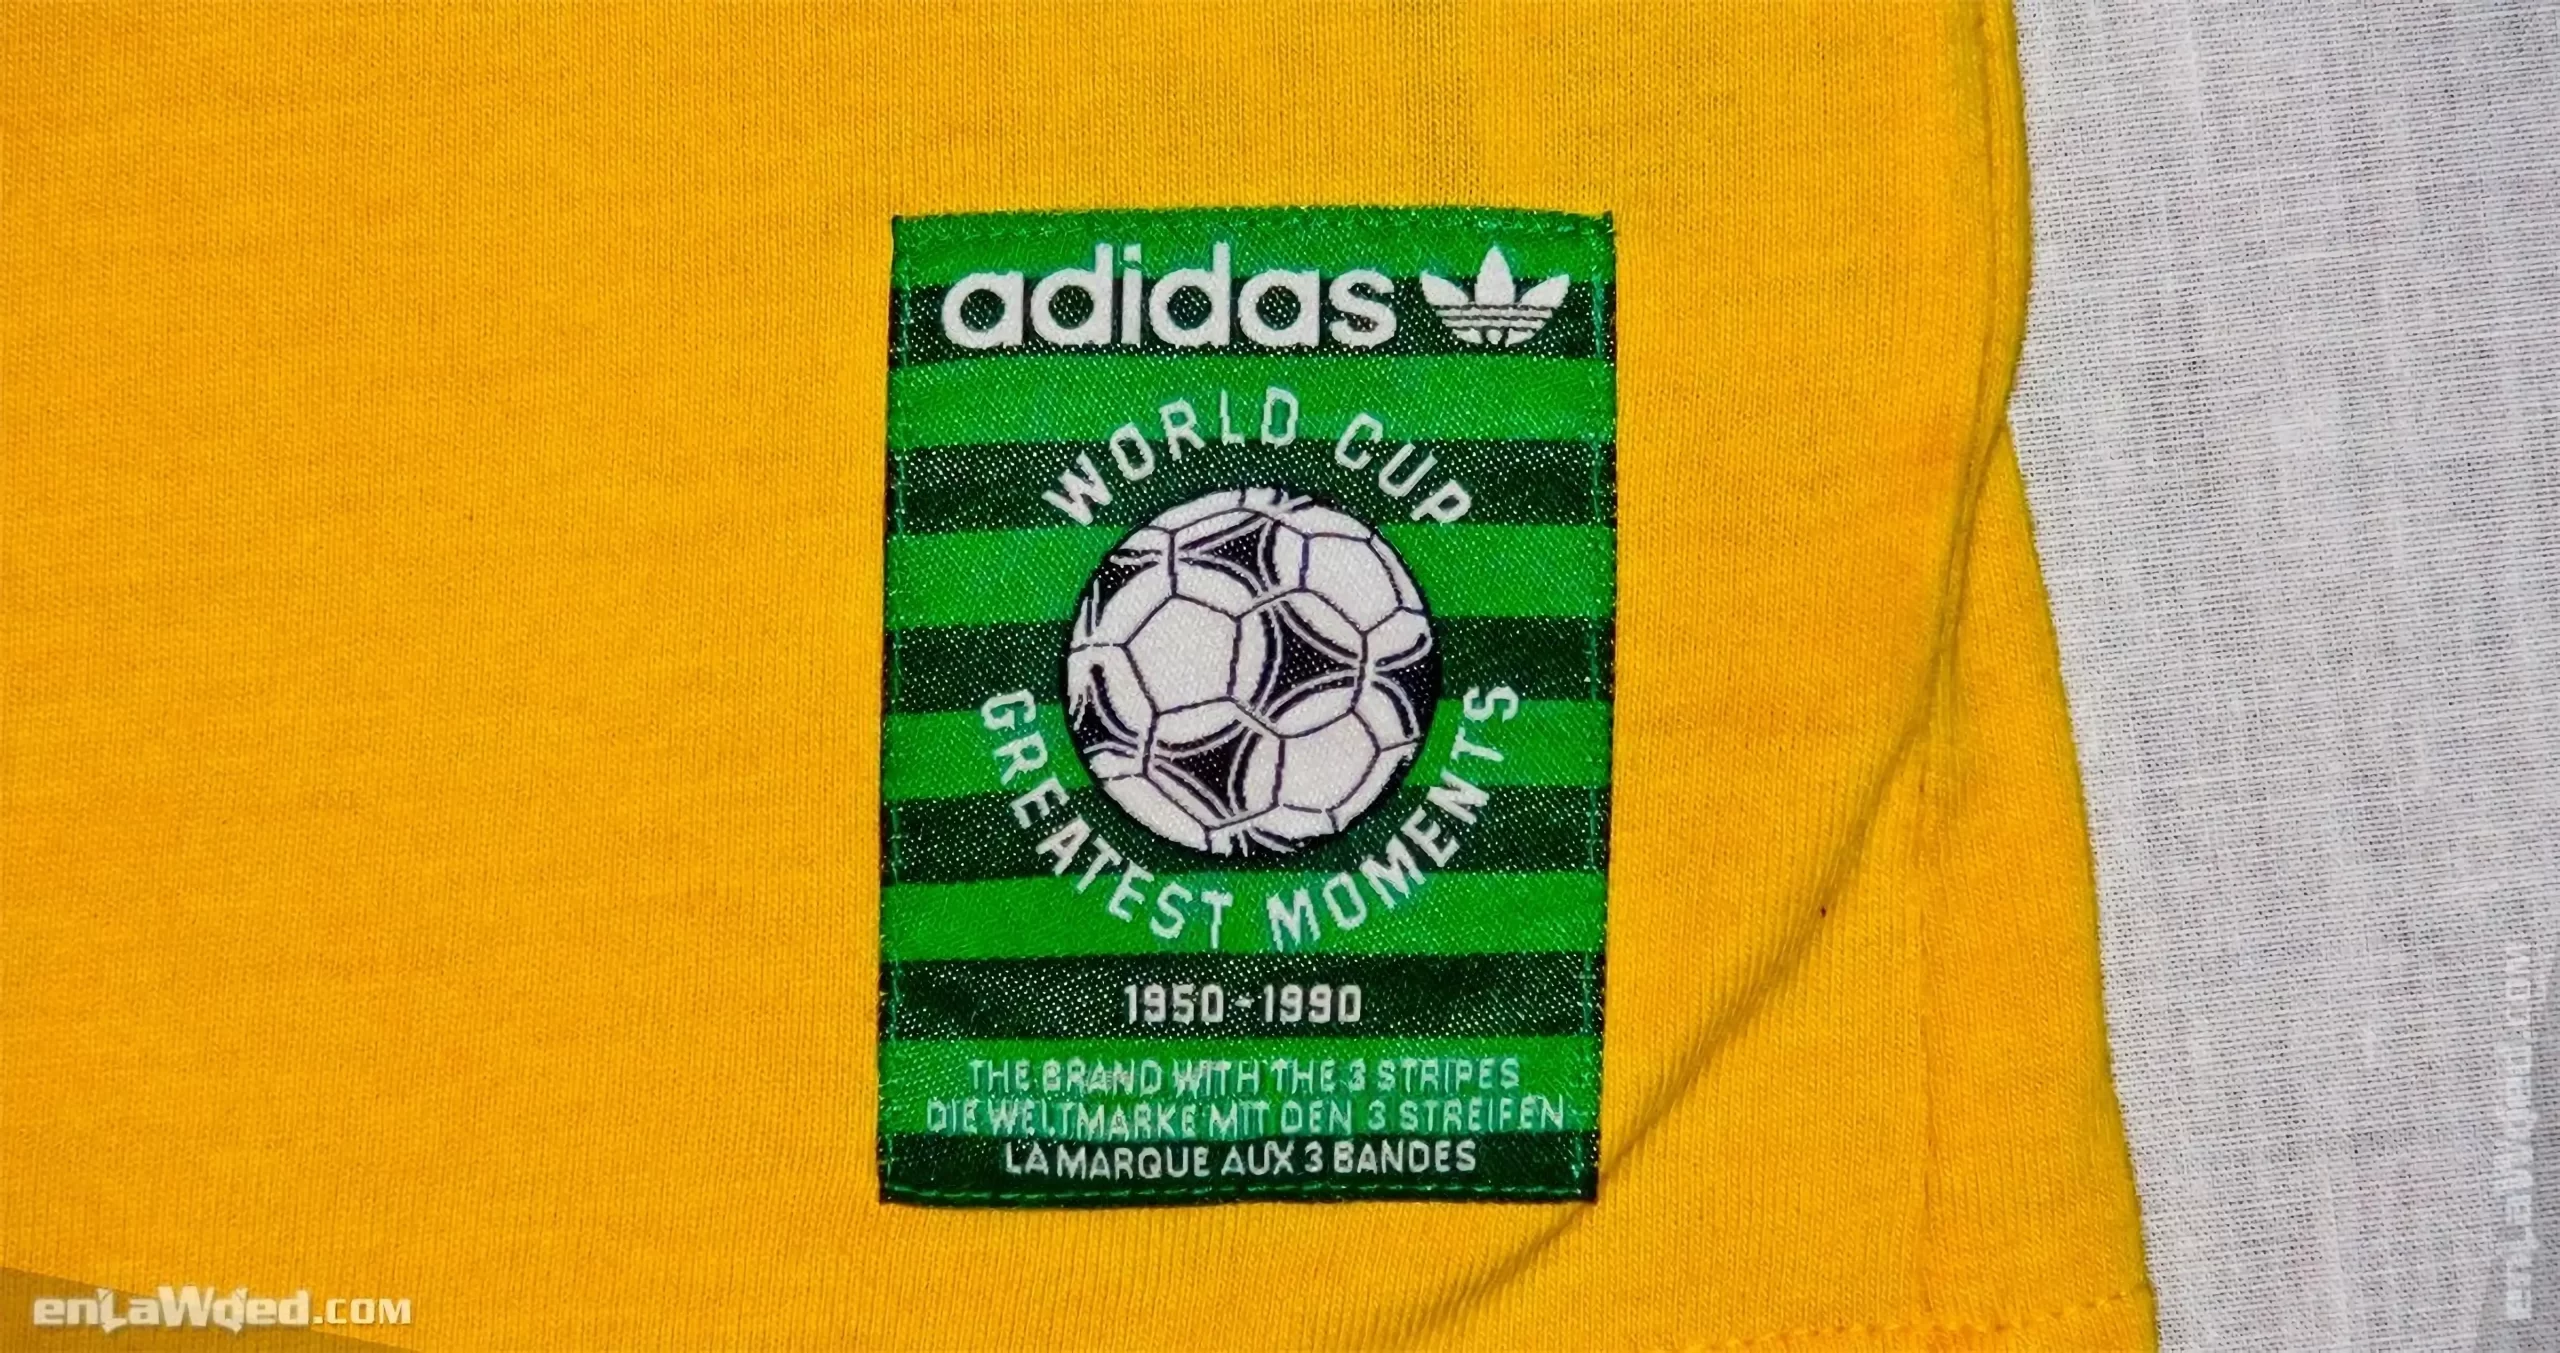 Men’s 2006 Brazil ’50 FIFA World Cup T-Shirt by Adidas: Comprehensive (EnLawded.com file #lmc3zs7hegy111due9i)